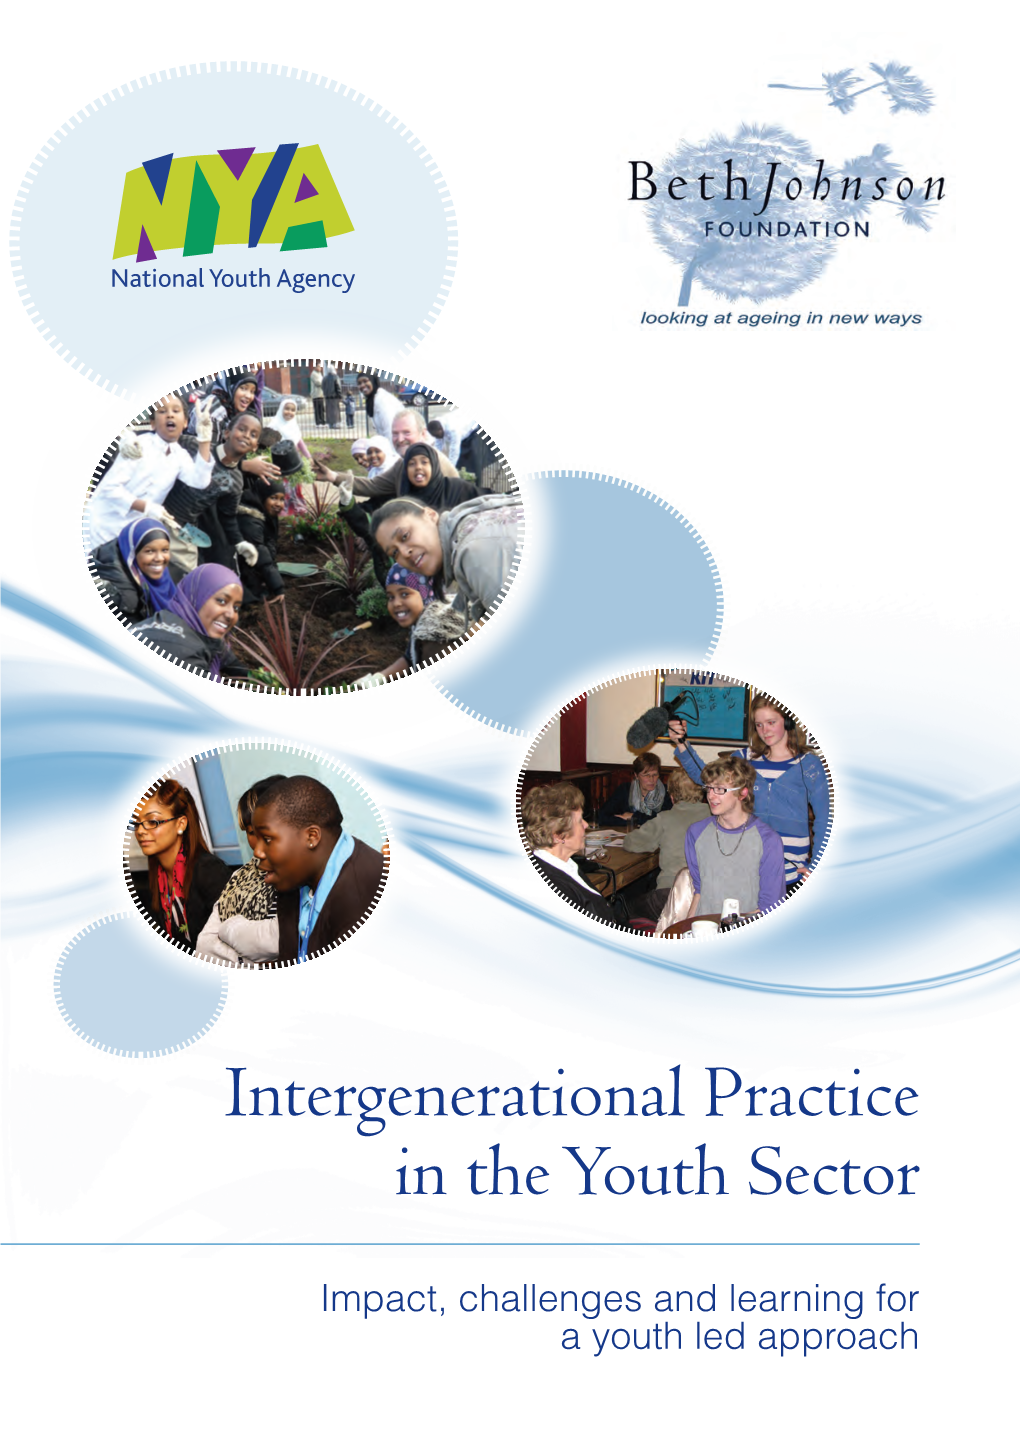 Intergenerational Practice in the Youth Sector